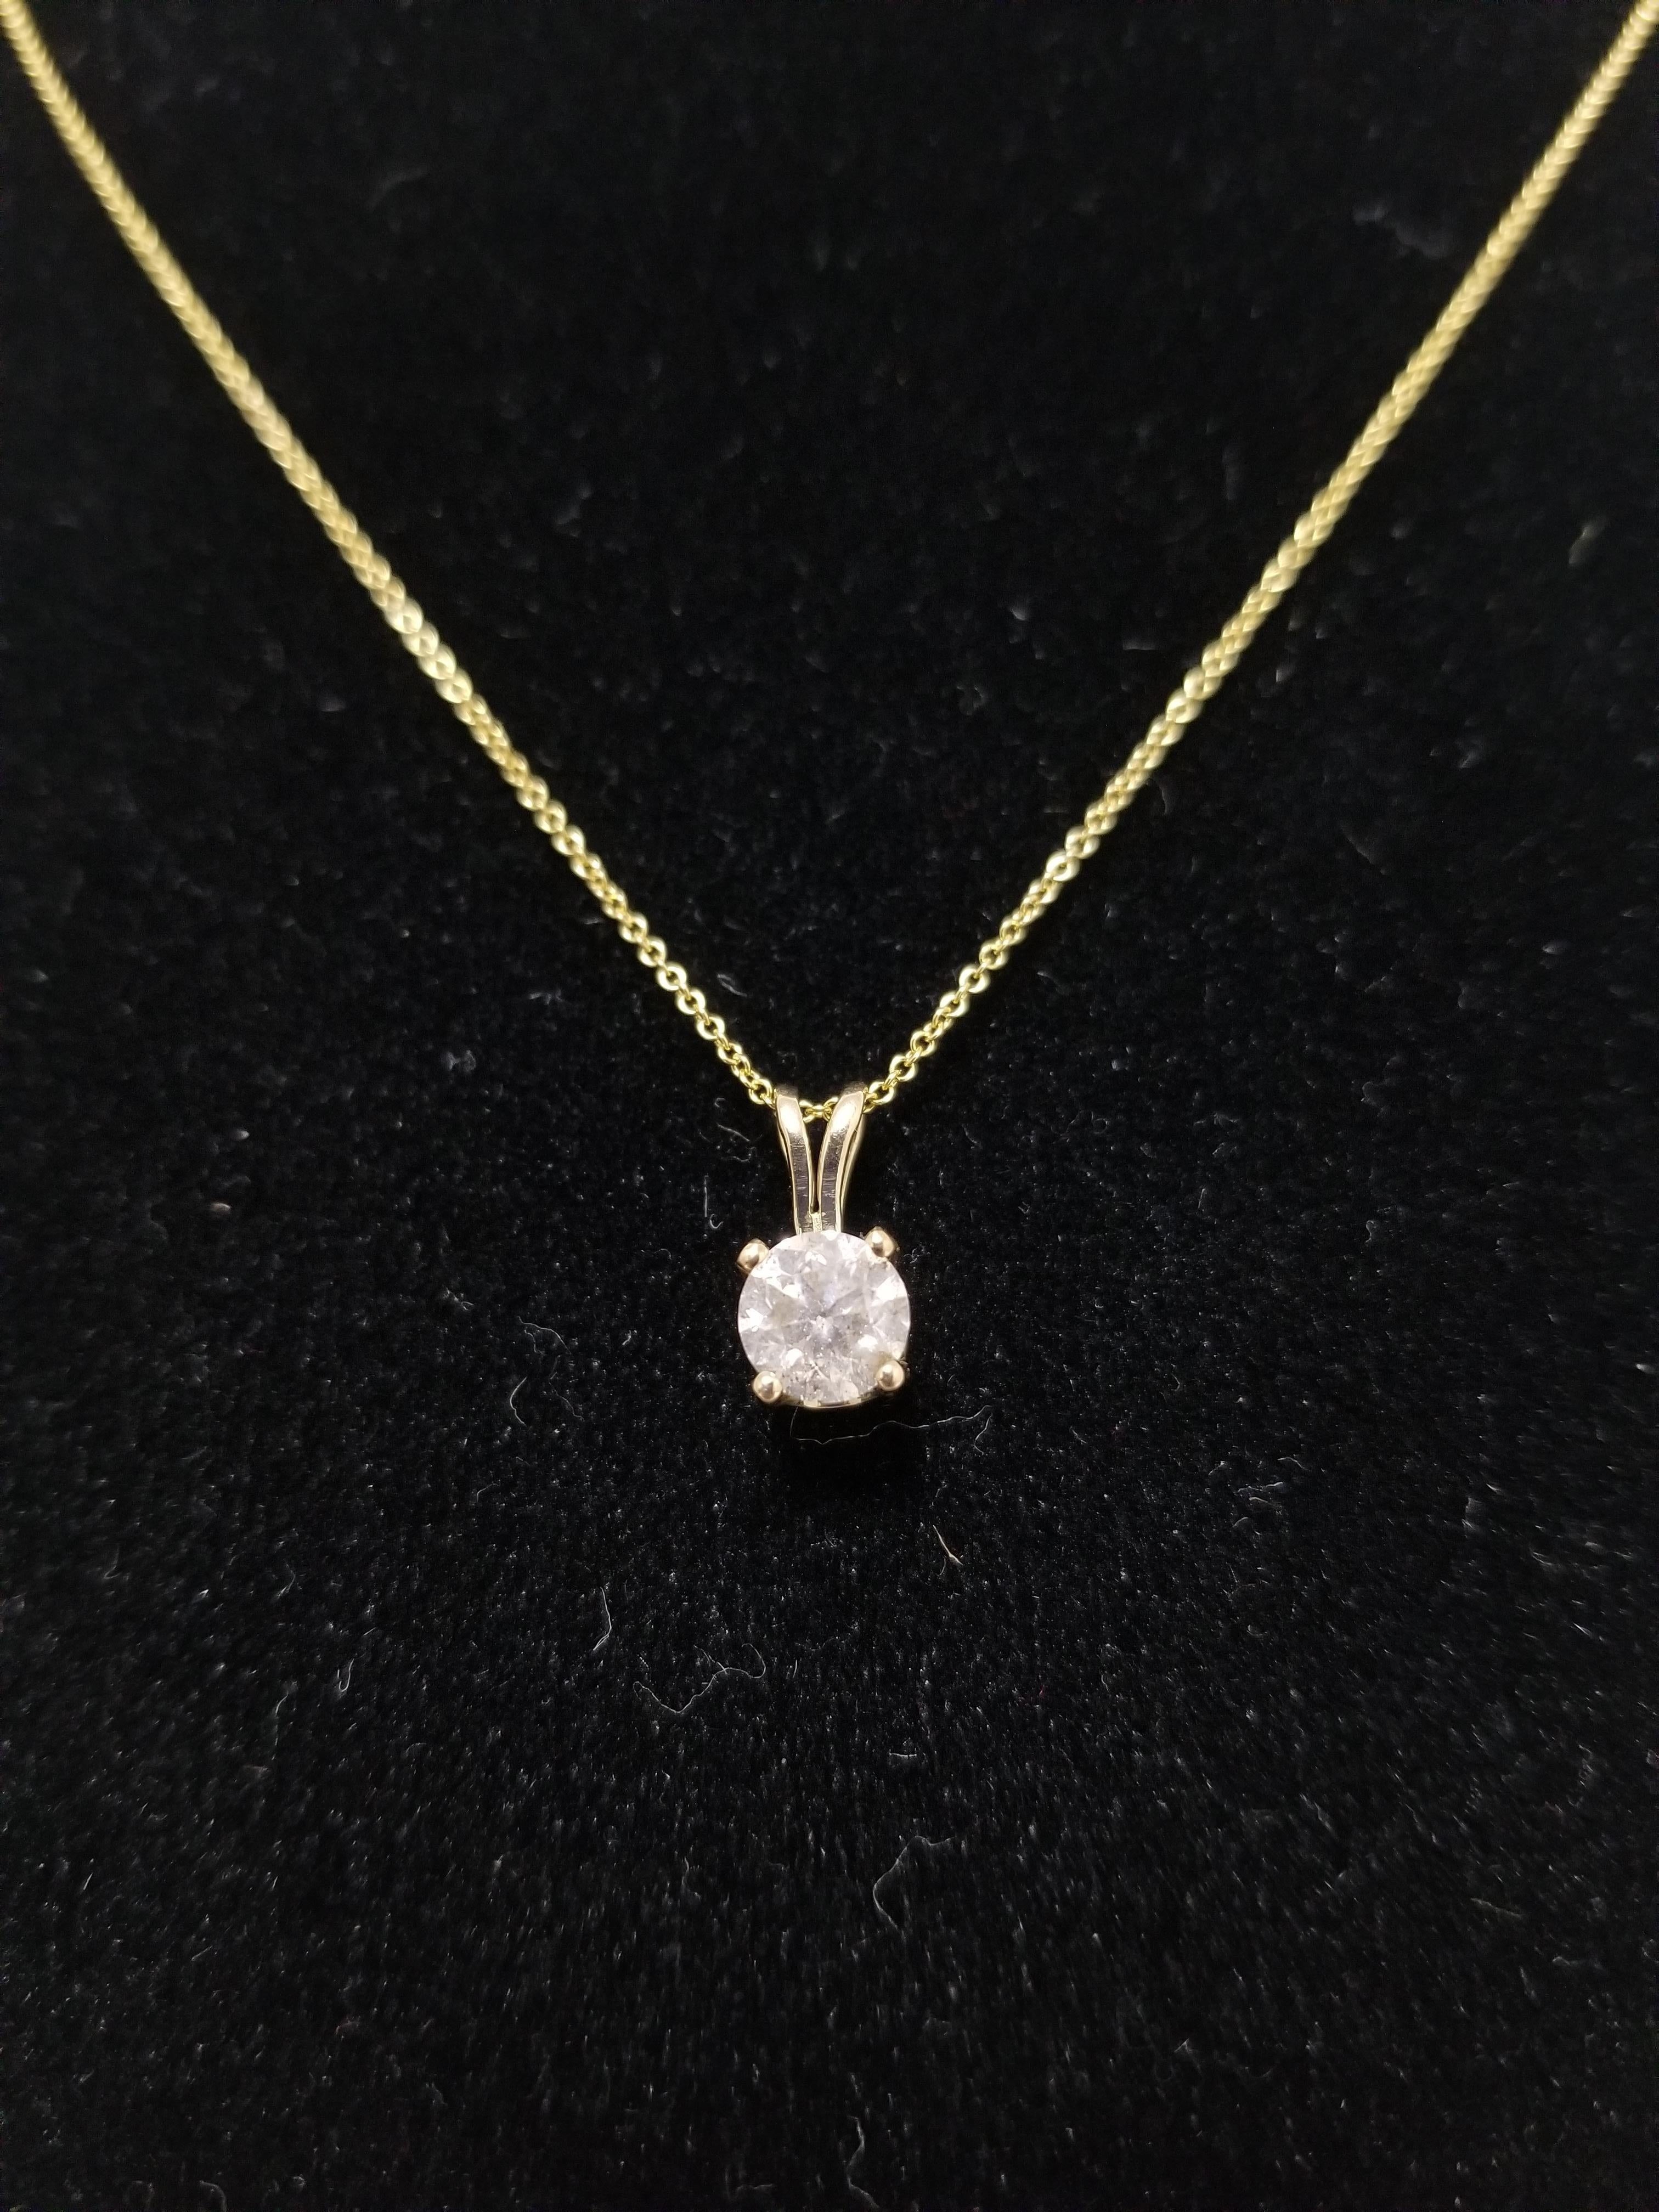 0.84 ct GIA fancy light gray round brilliant cut diamonds. set in 14k rose gold. pendant measures approximately 0.5 inch length and 0.25 inch wide.

(Pendant Only-Chain sold separately.)